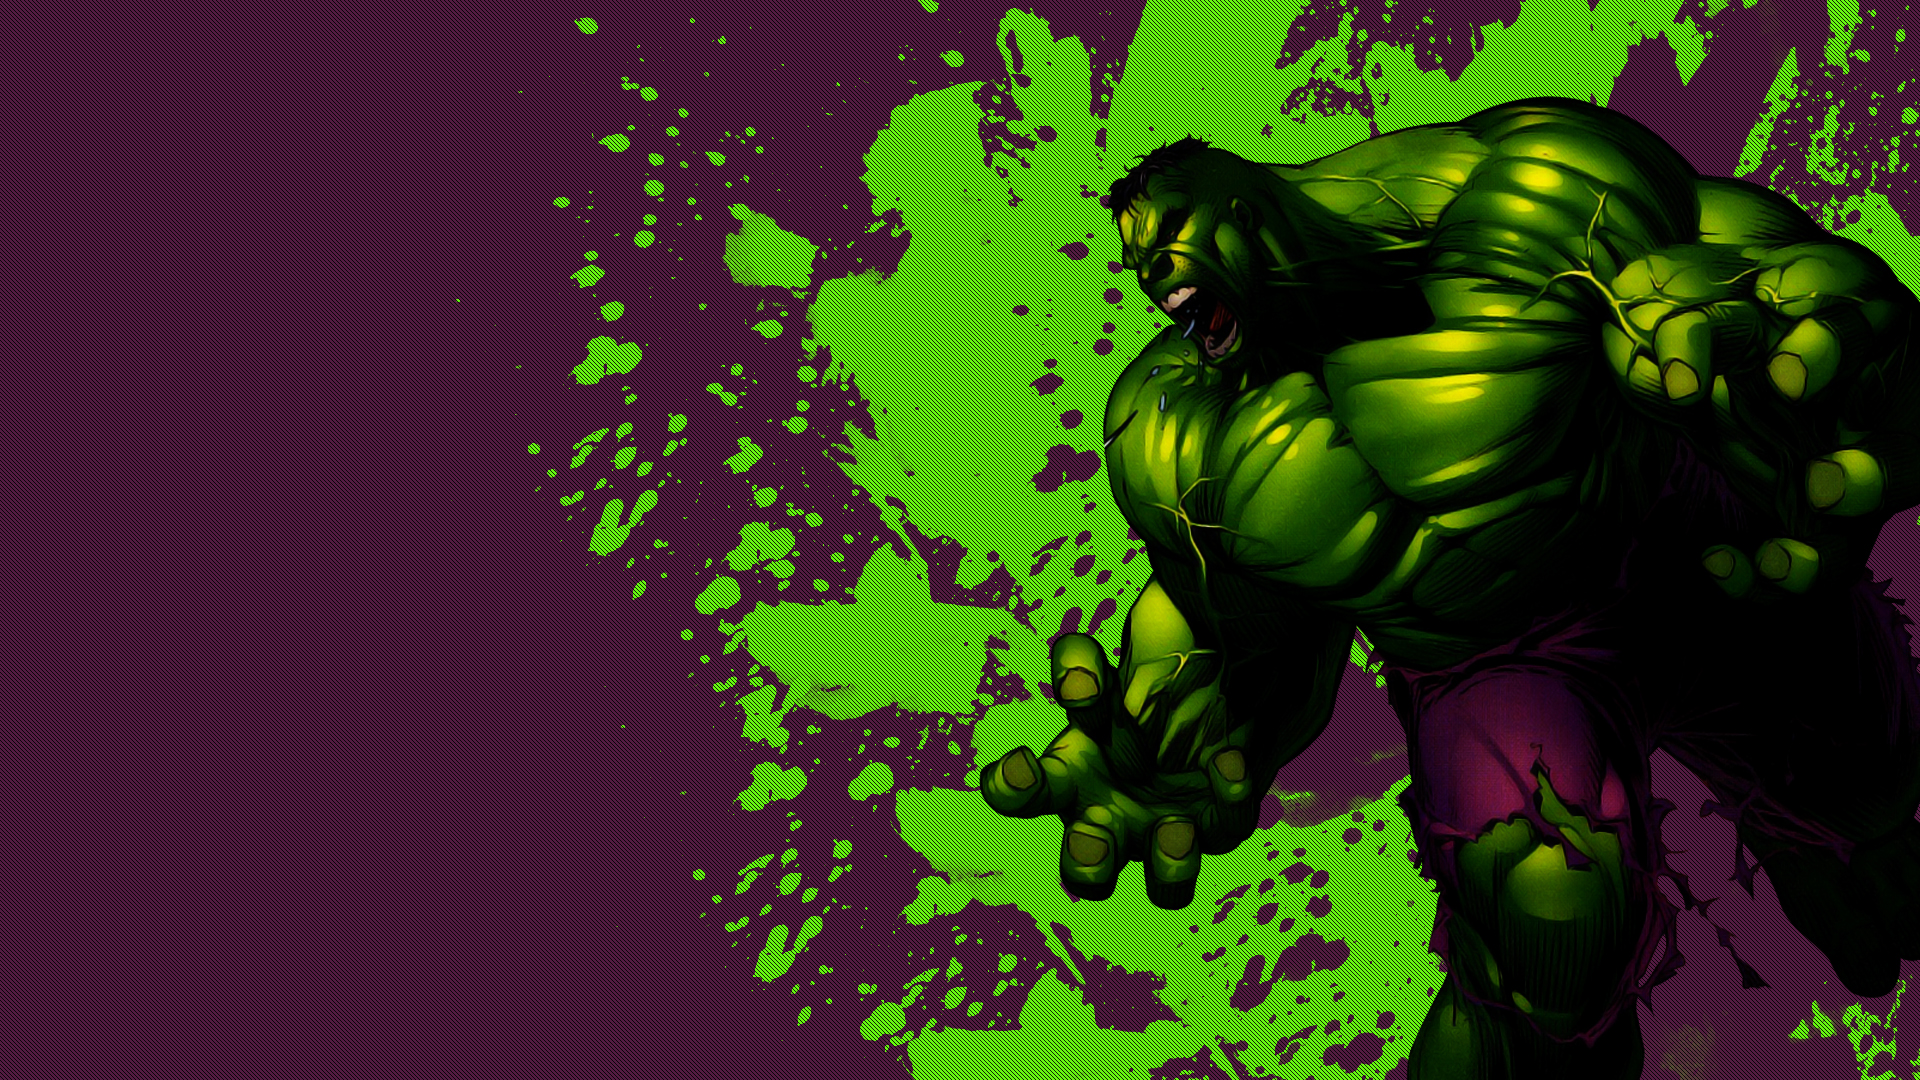 Hulk Wallpapers HD Wallpapers, Backgrounds, Images, Art Photos